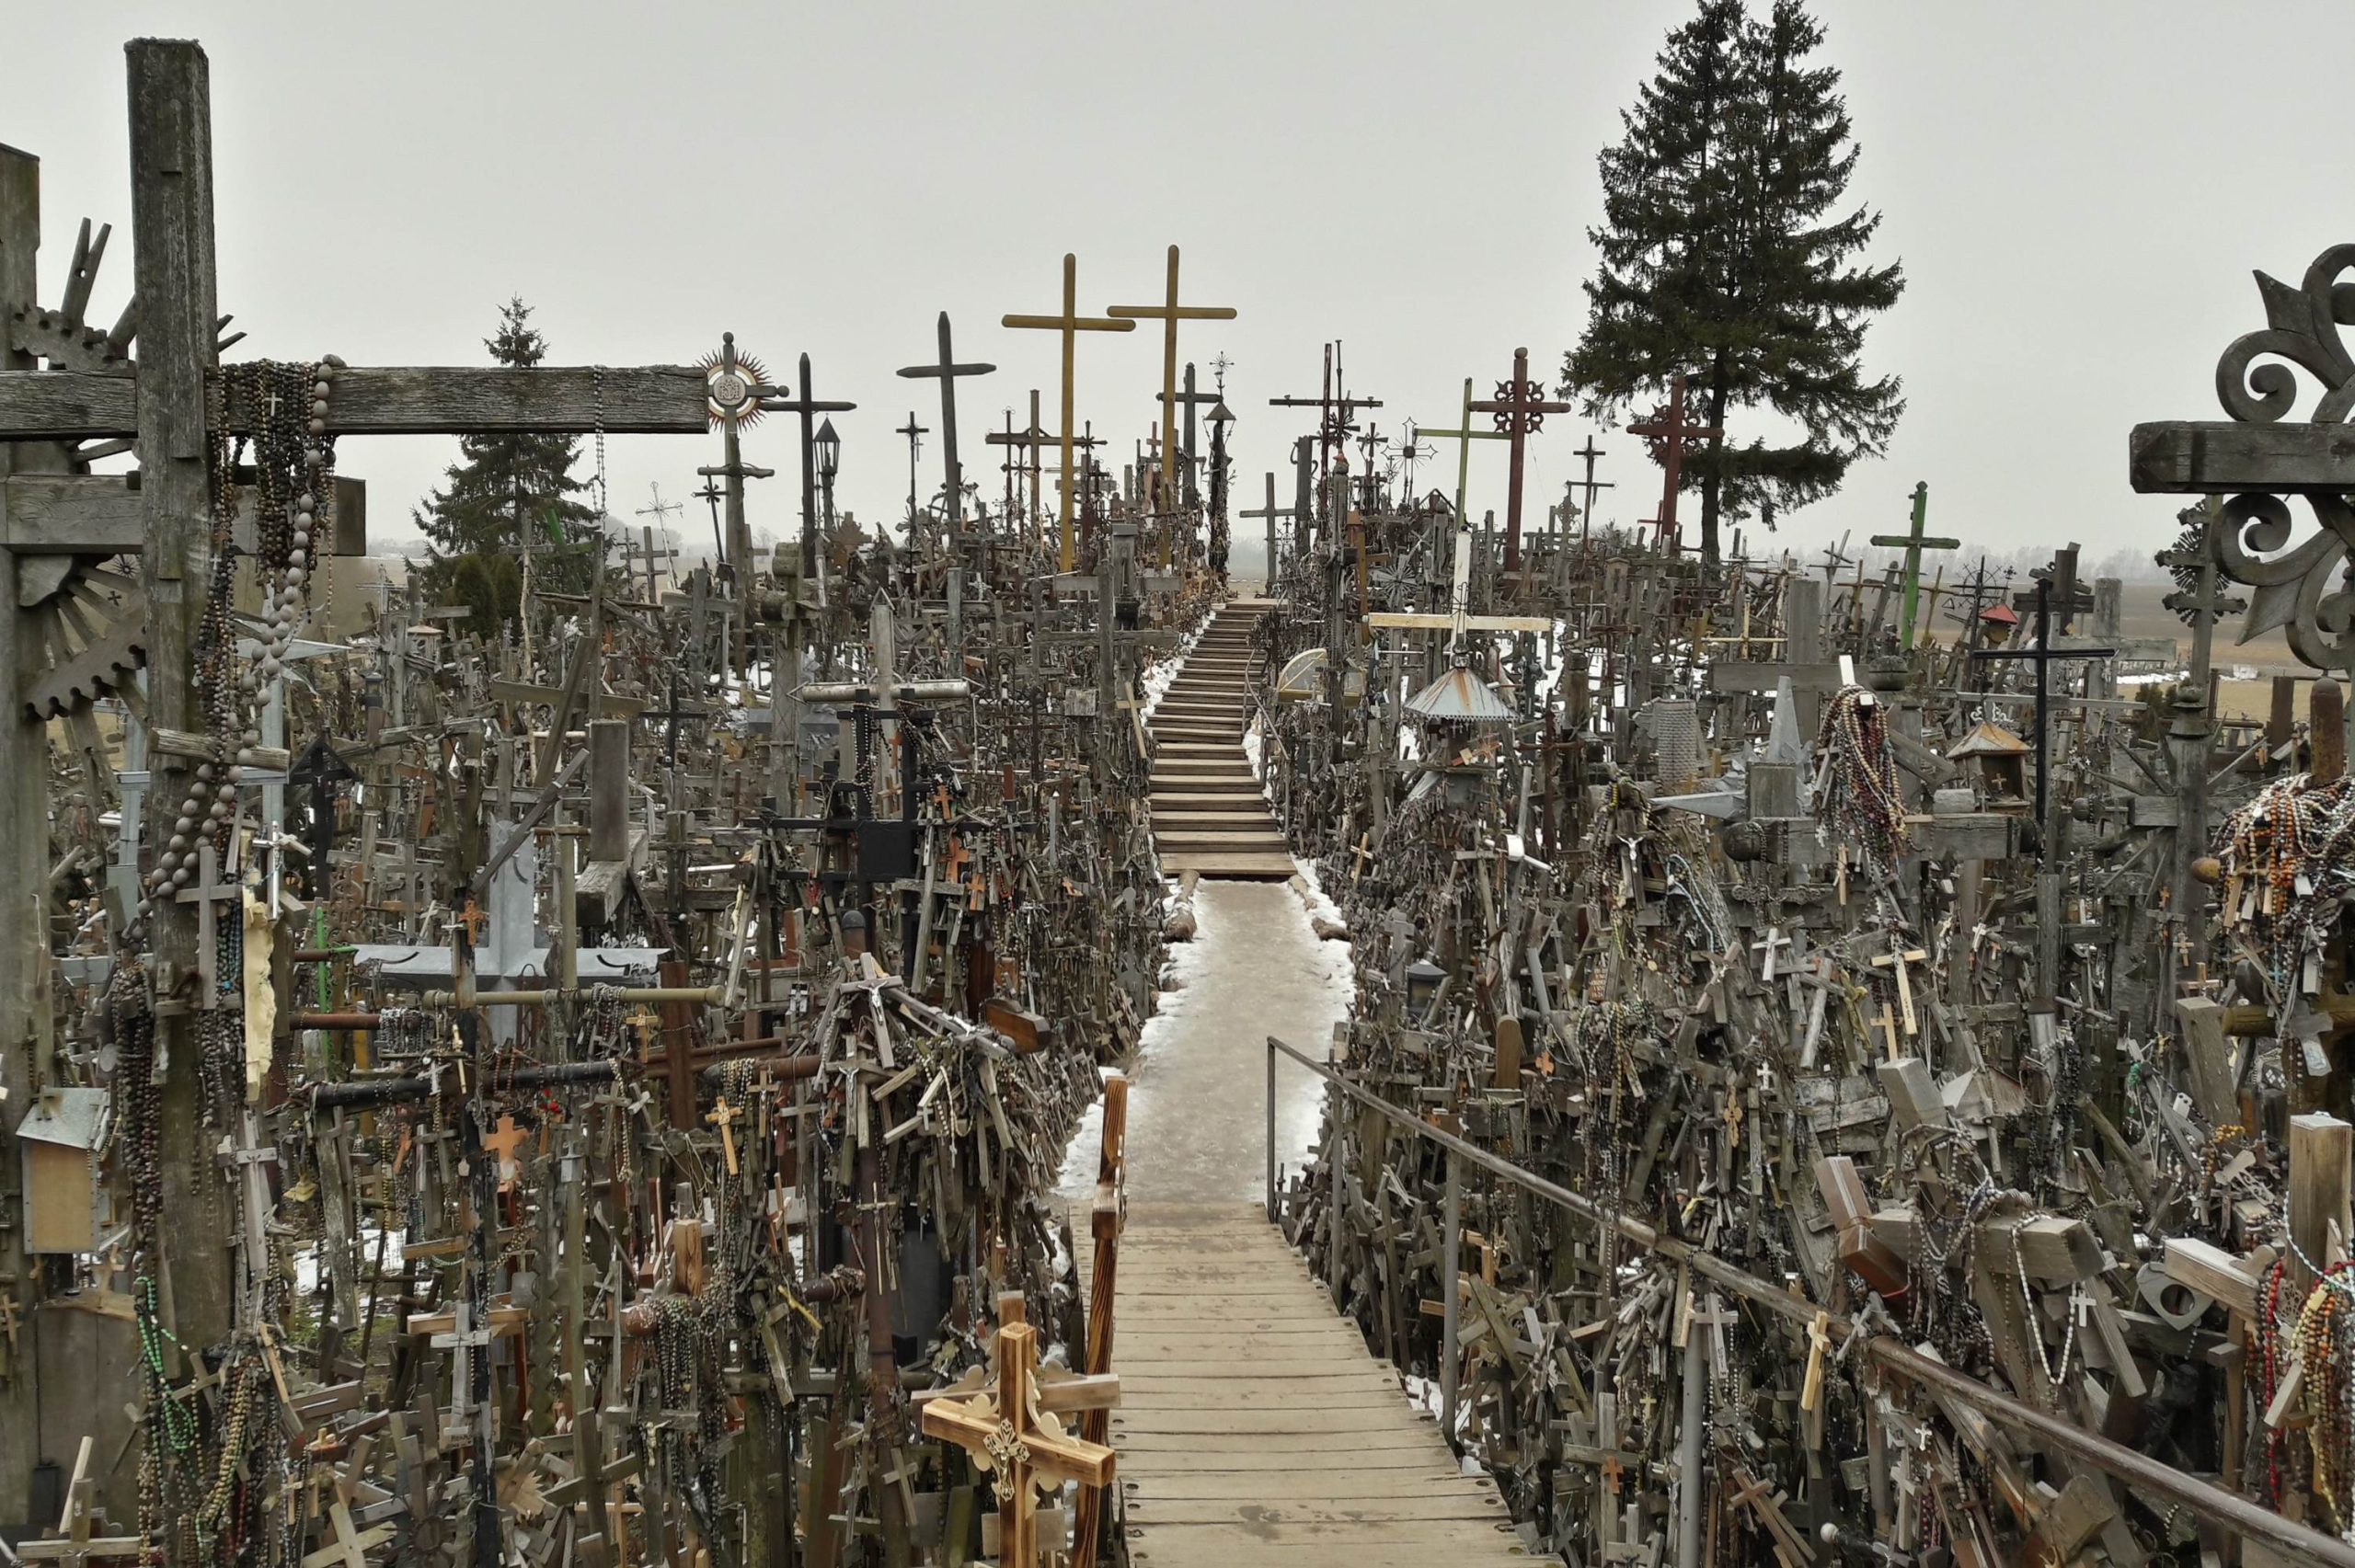 Hill of crosses surrounded by a number of impressive crosses.